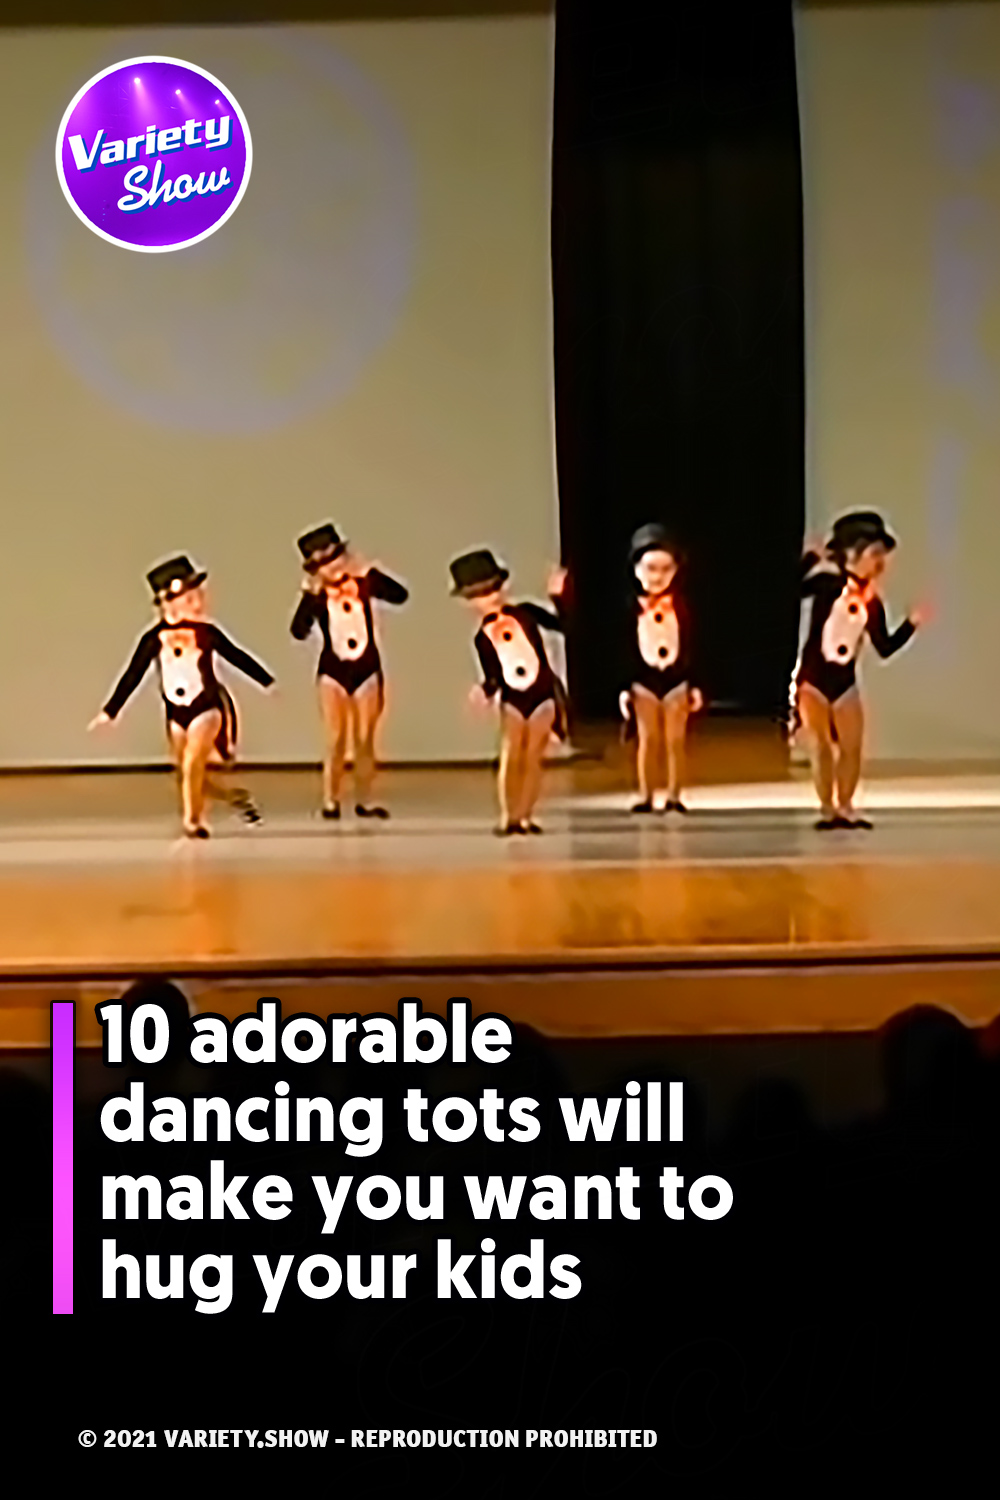 10 adorable dancing tots will make you want to hug your kids